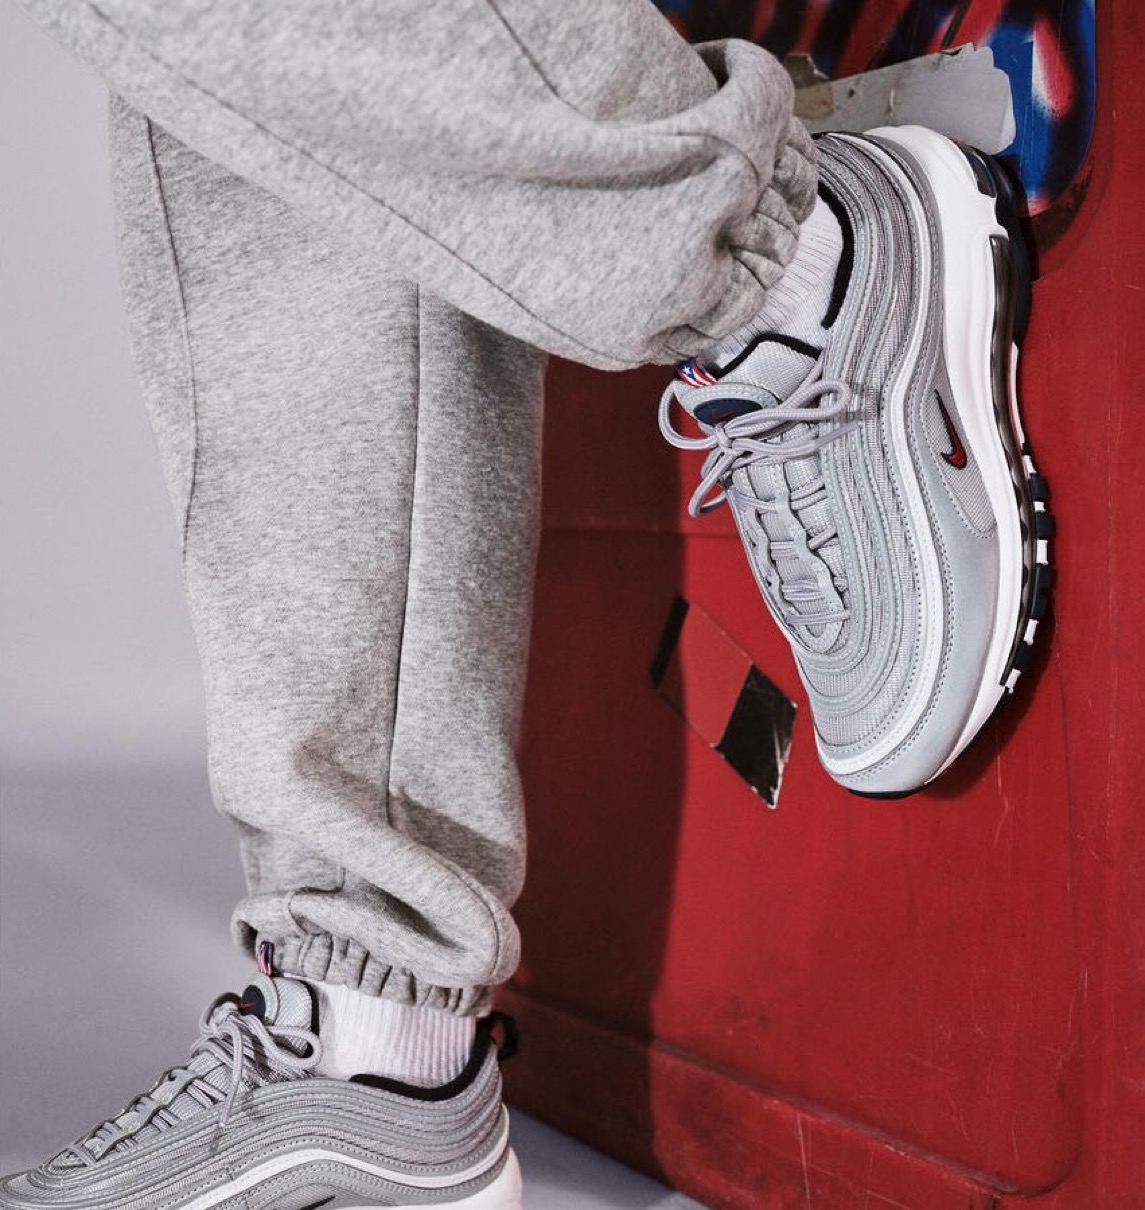 Nike】Air Max 97 SP “Puerto Rico”が2021年6月5日に発売予定 | UP TO DATE